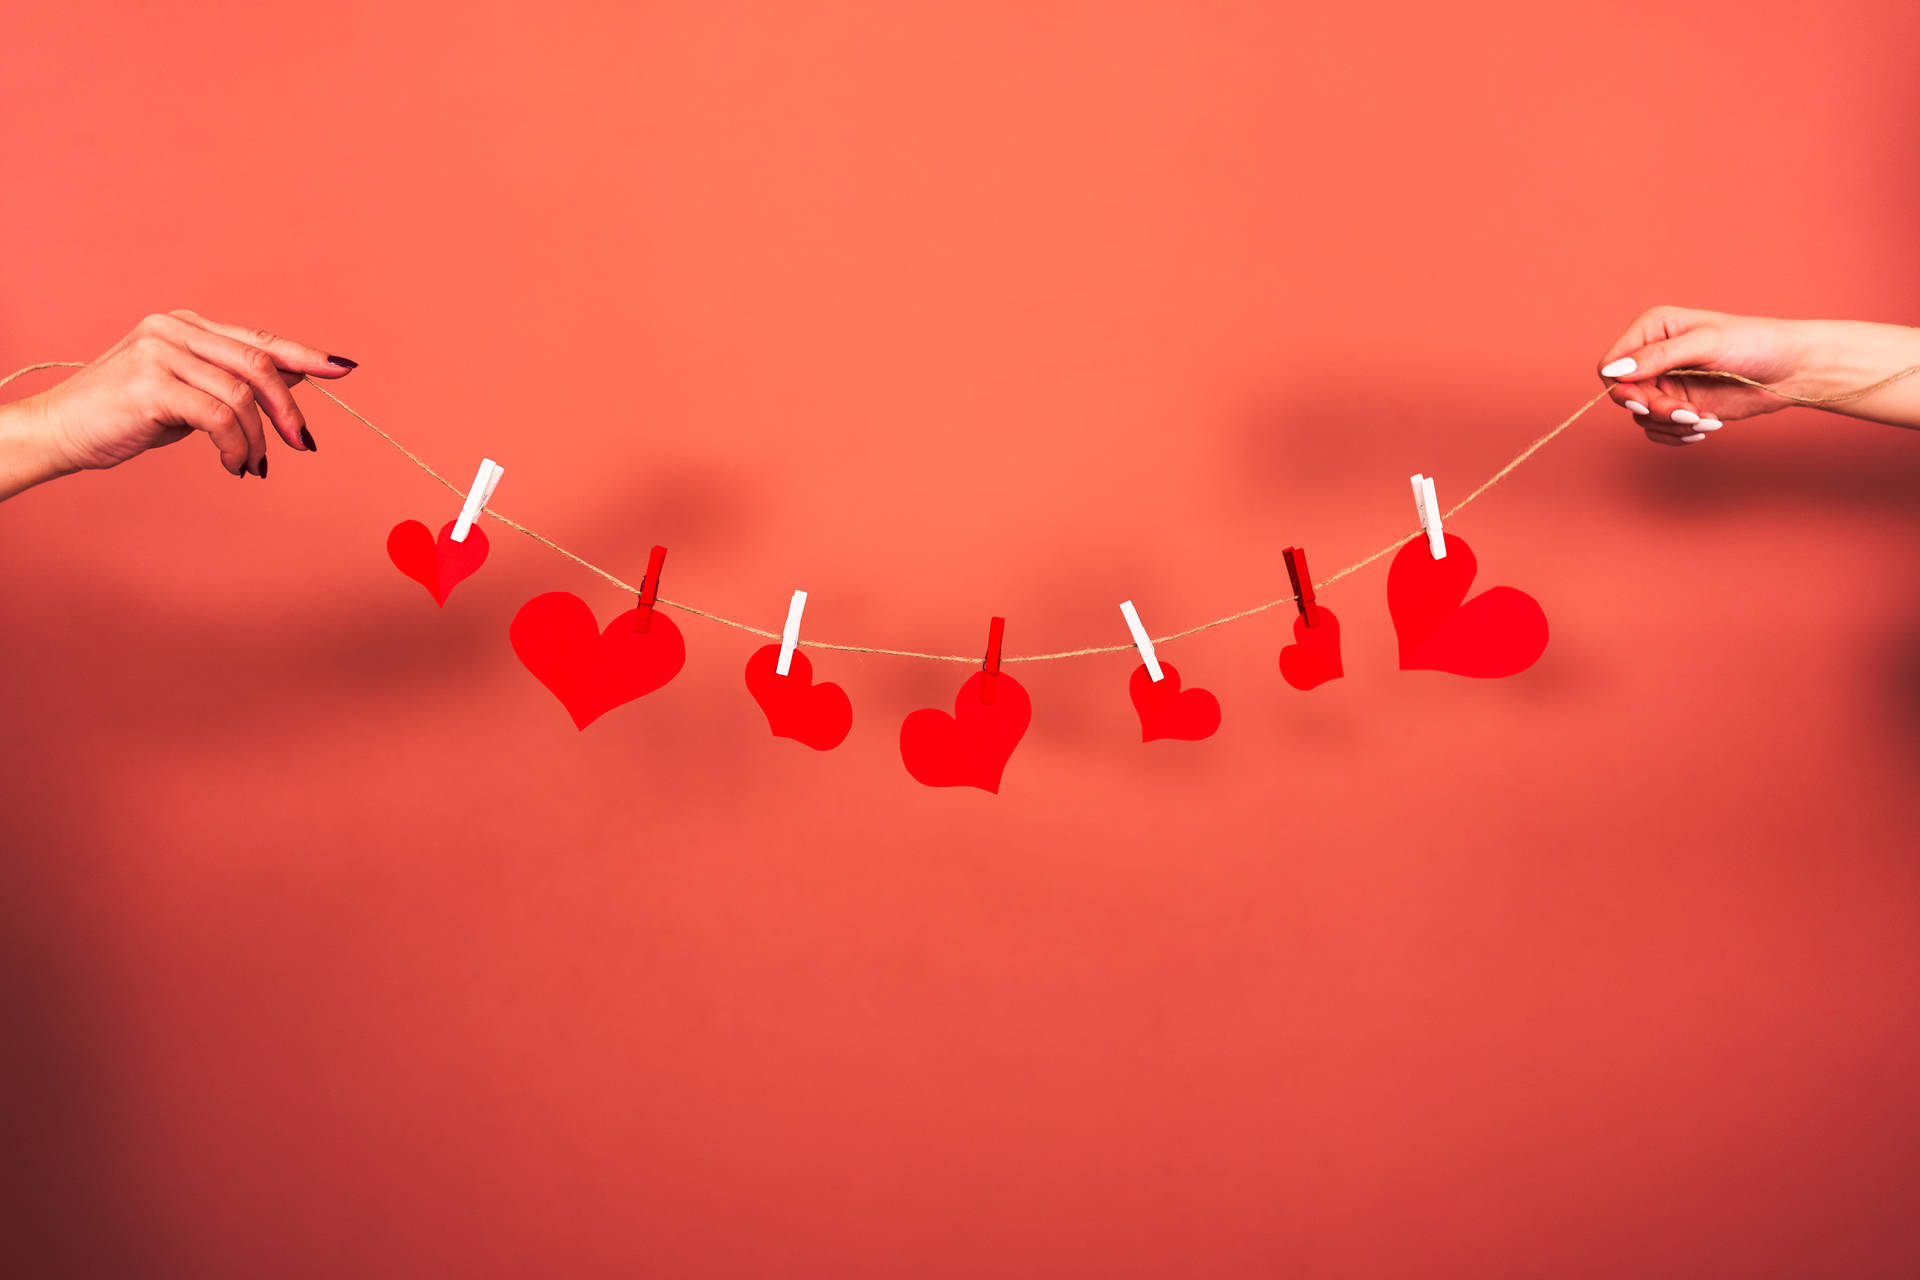 Aesthetic Heart Shapes On A String Background